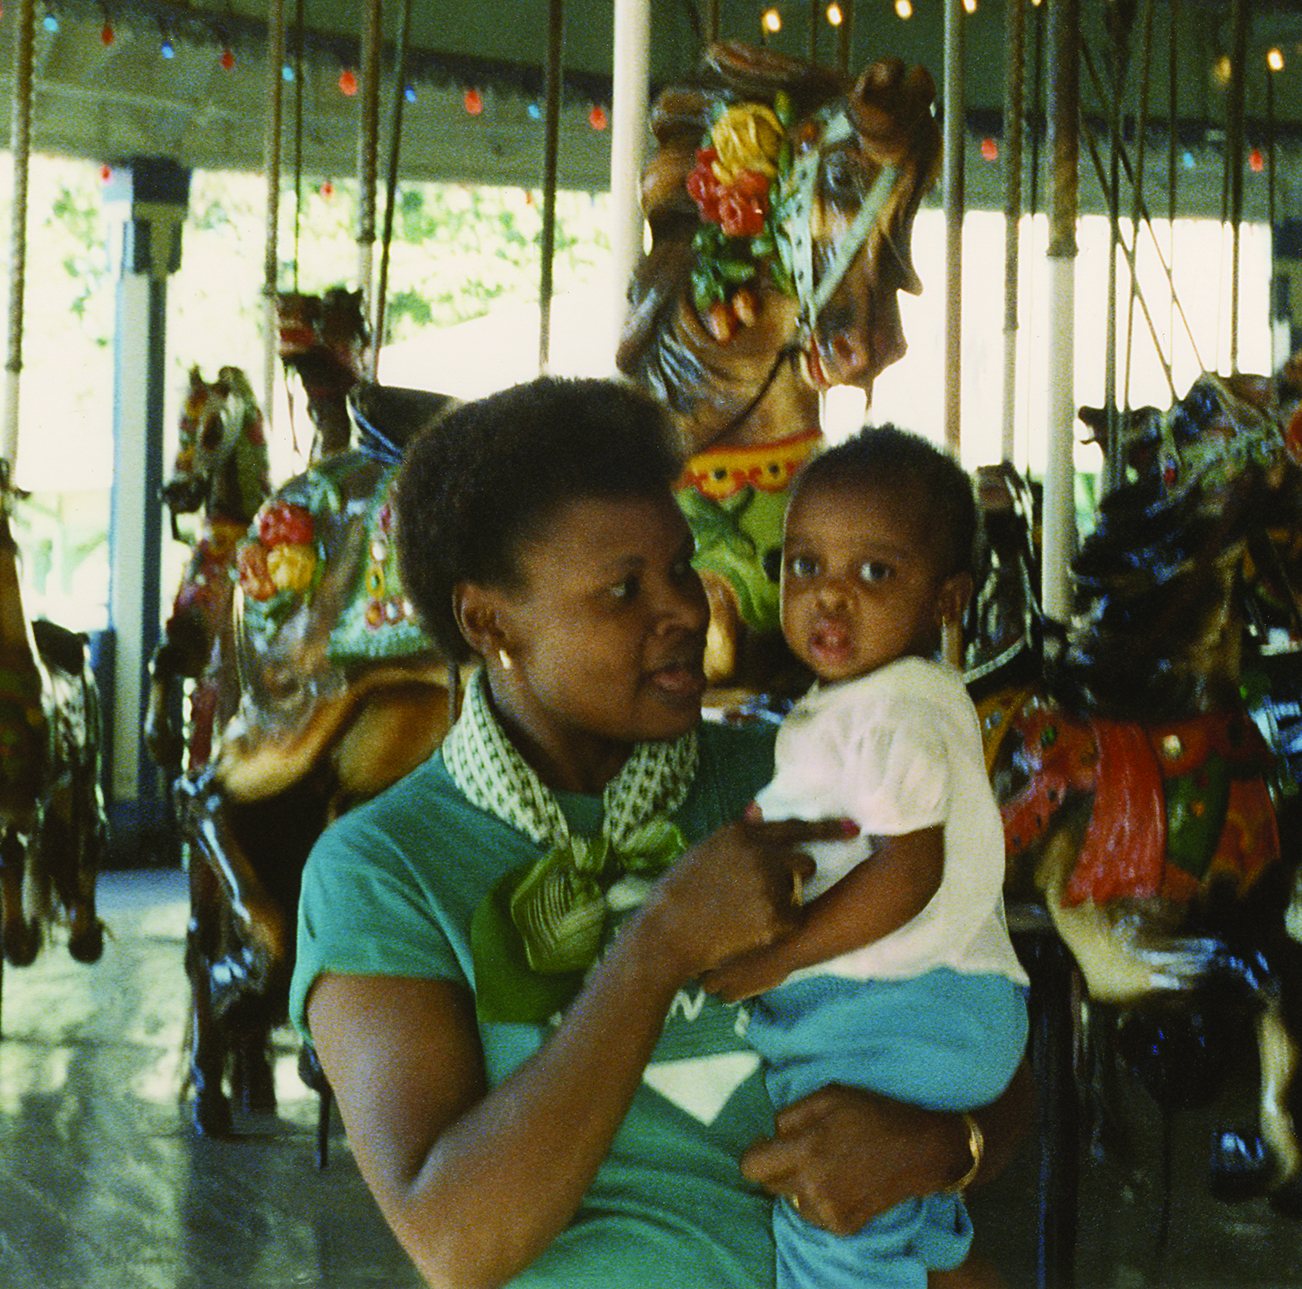 Lee Patterson and her mom at the carousel